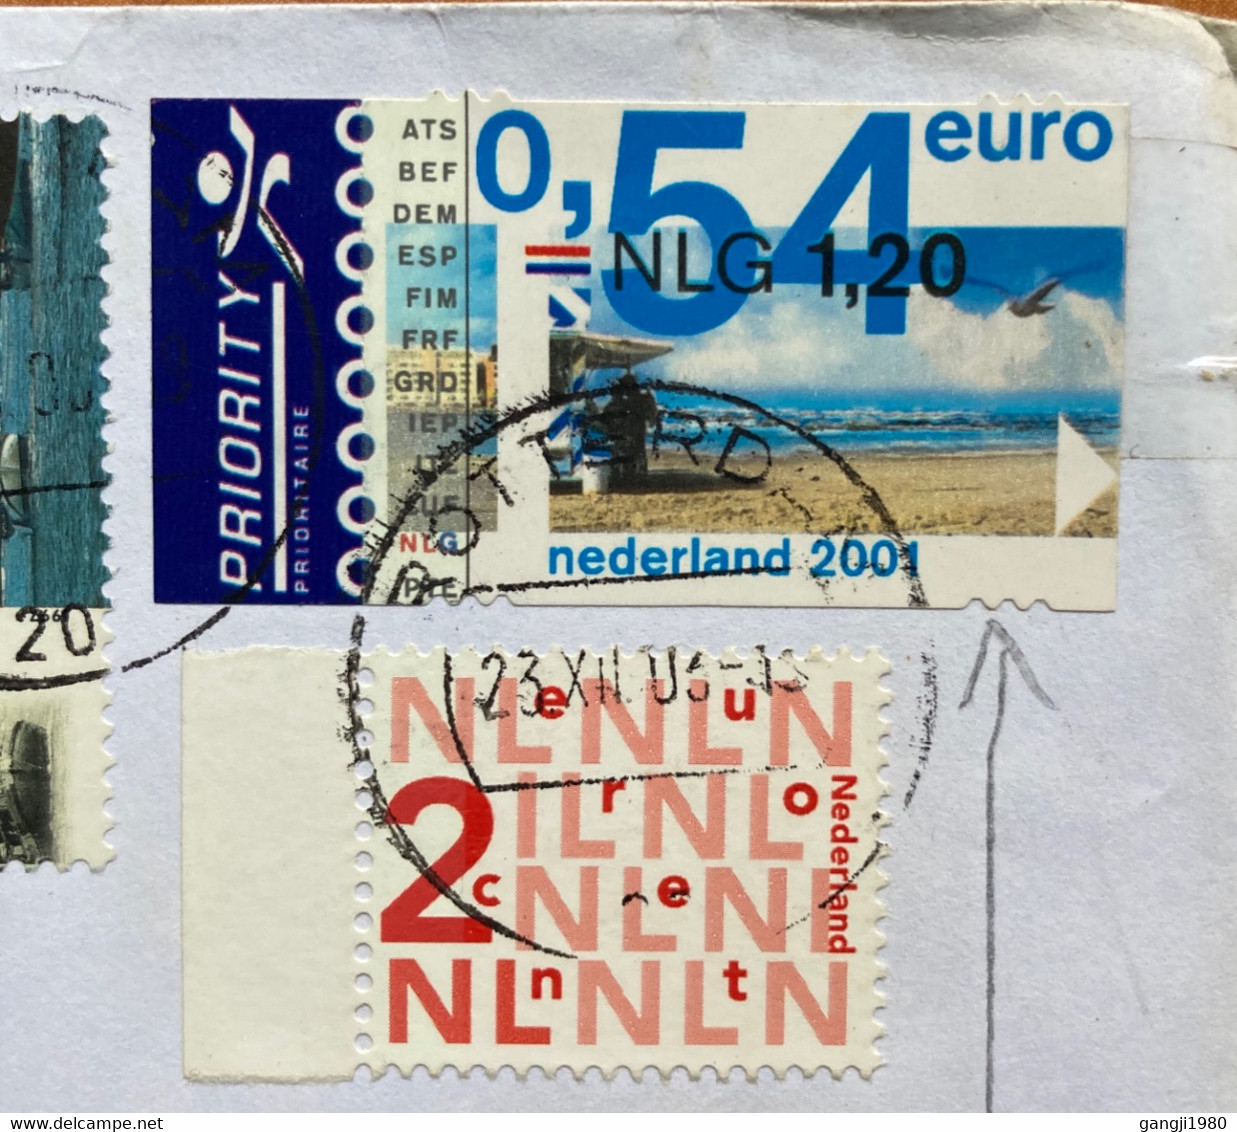 NEDERLAND 2004, PRIORITY SELF-ADHESIVE ATM STAMP ,5 VIEW OF SEA & CITY SHIP COVER TO LITHUANIA - Lettres & Documents